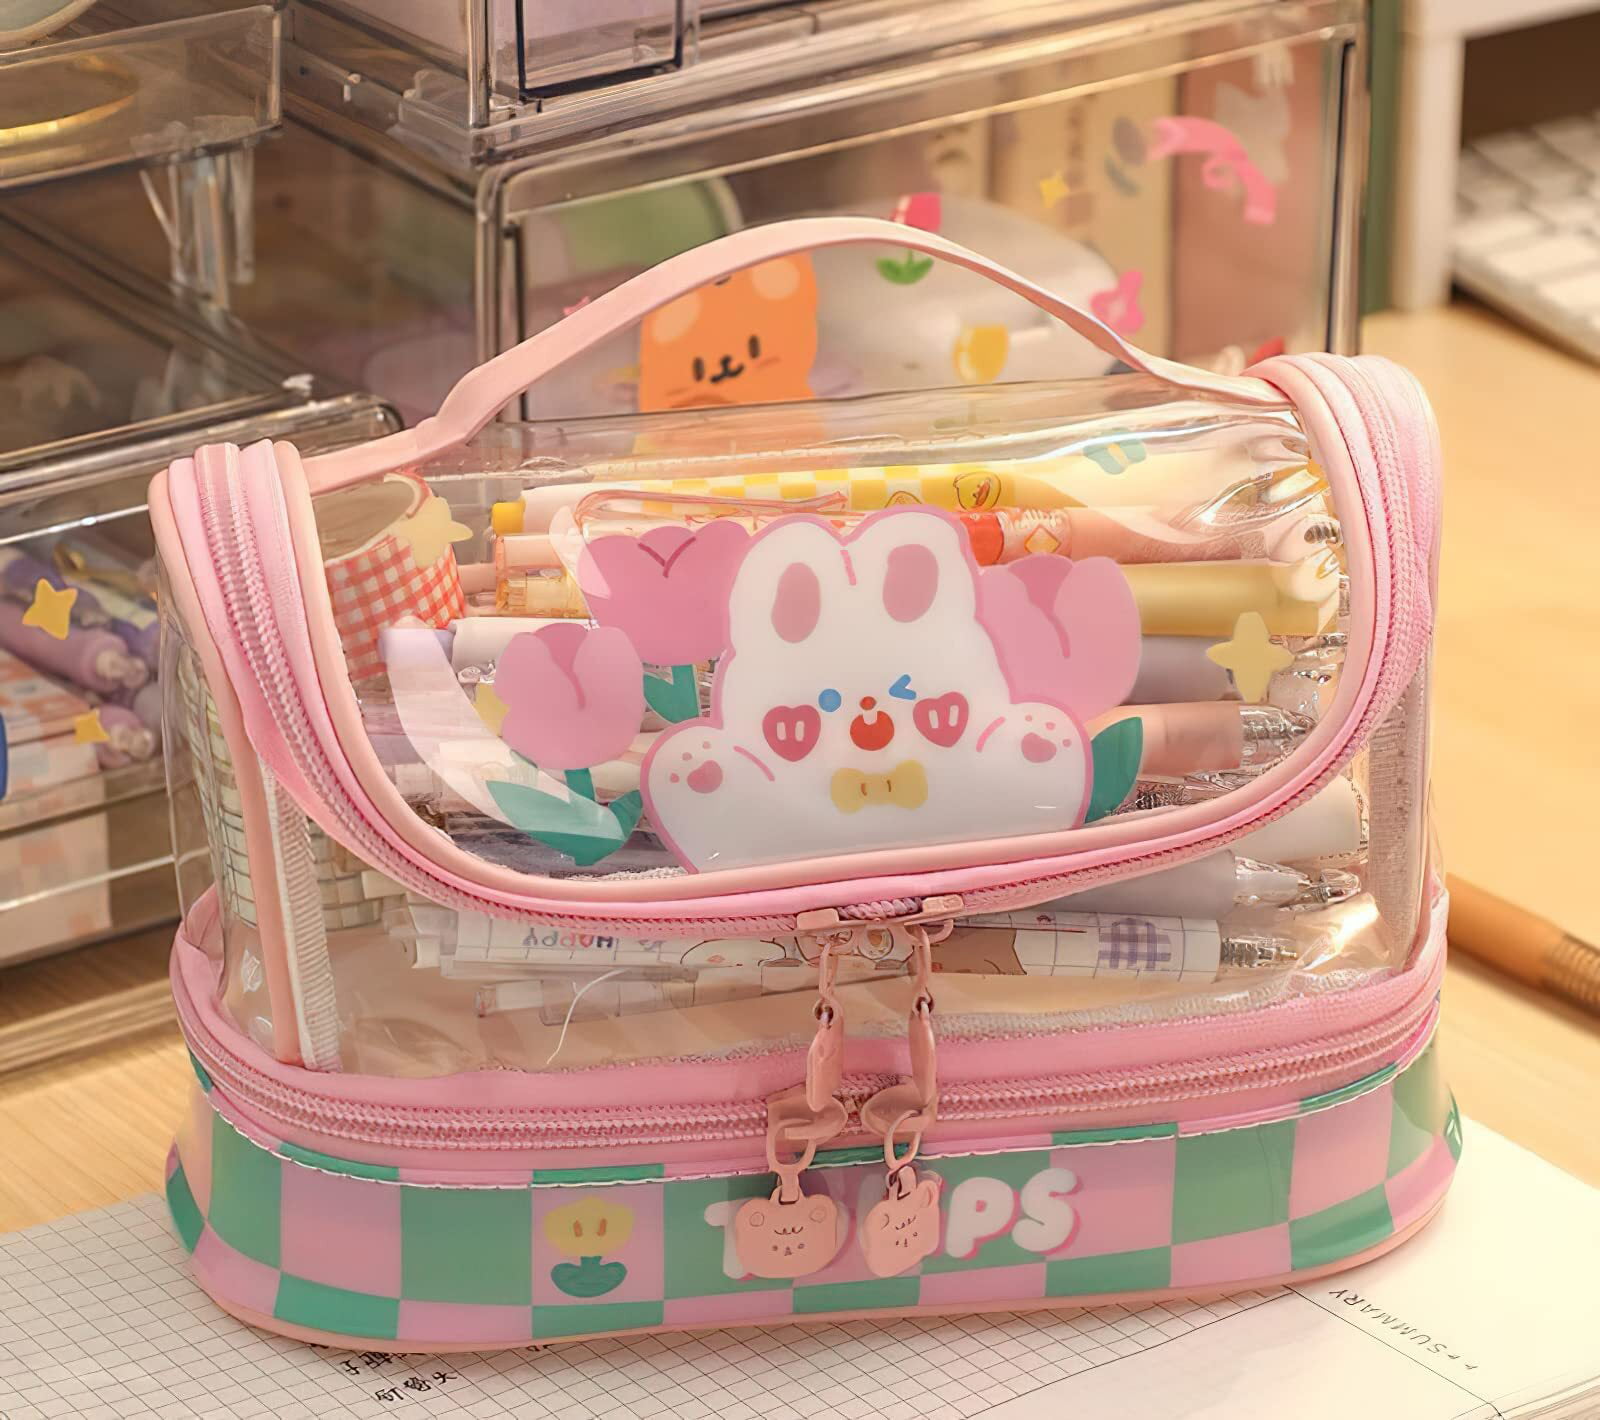 Liangnv Kawaii Aesthetic Cute Pencil Case Bag Large Storage High Capacity  Stationery With 2 Compartments Pouch Box Holder Organizer Office College  Sch